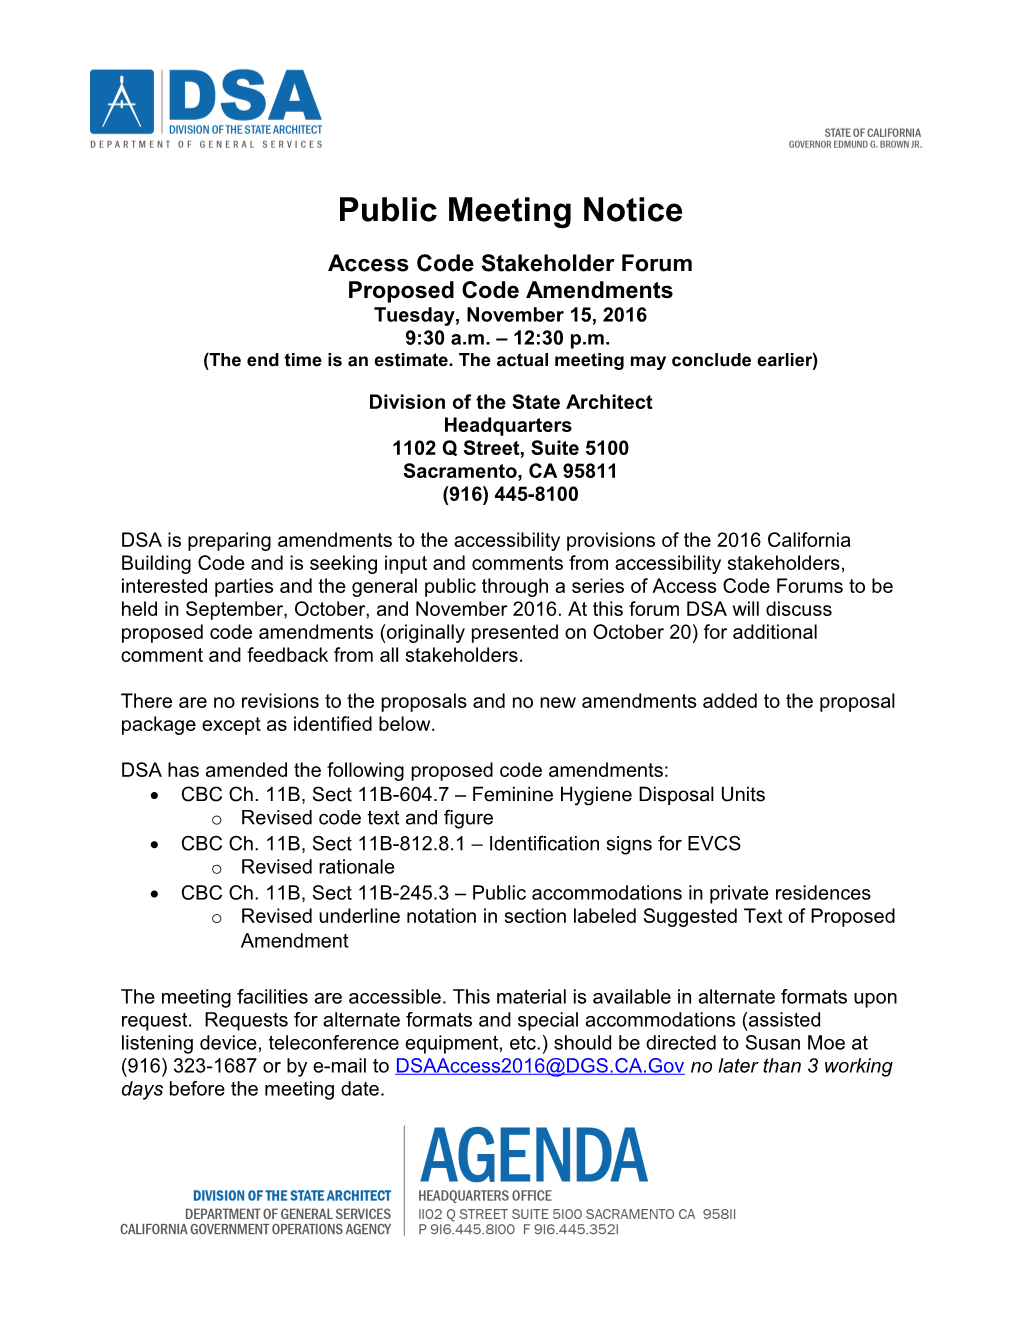 Public Meeting Notice: Access Code Stakeholder Forum, November 15, 2016